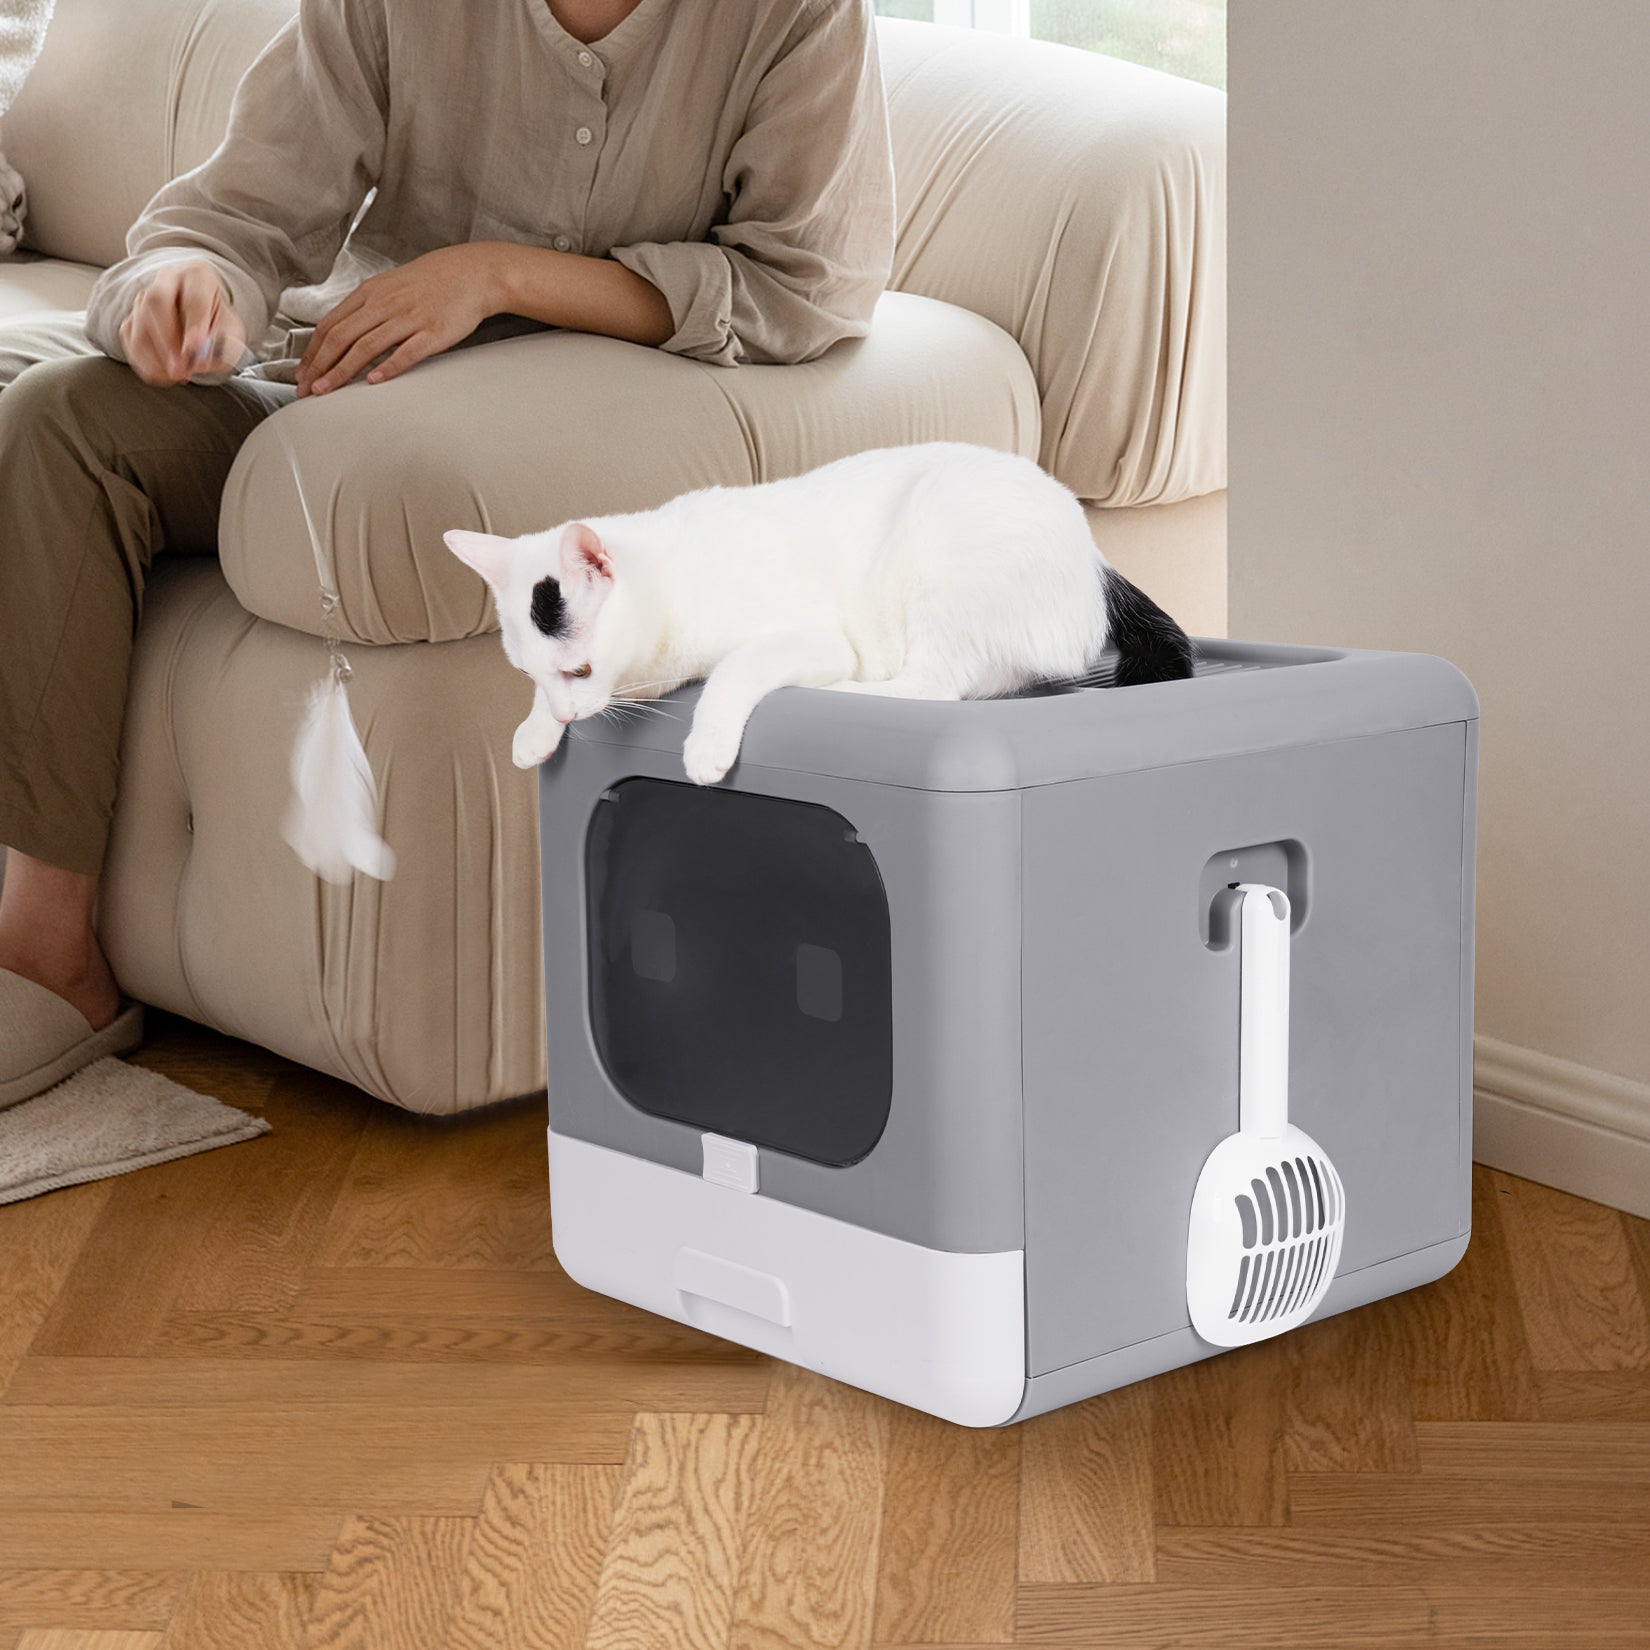 Top Entry Cat PEE Cleaning Including Lid Foldable Include Cat Litter Box  Litter Scoop Enclosed Kitty Litter Box with Drawer Tray Easy Clean - China Cat  Litter Box and Cat Toilet price